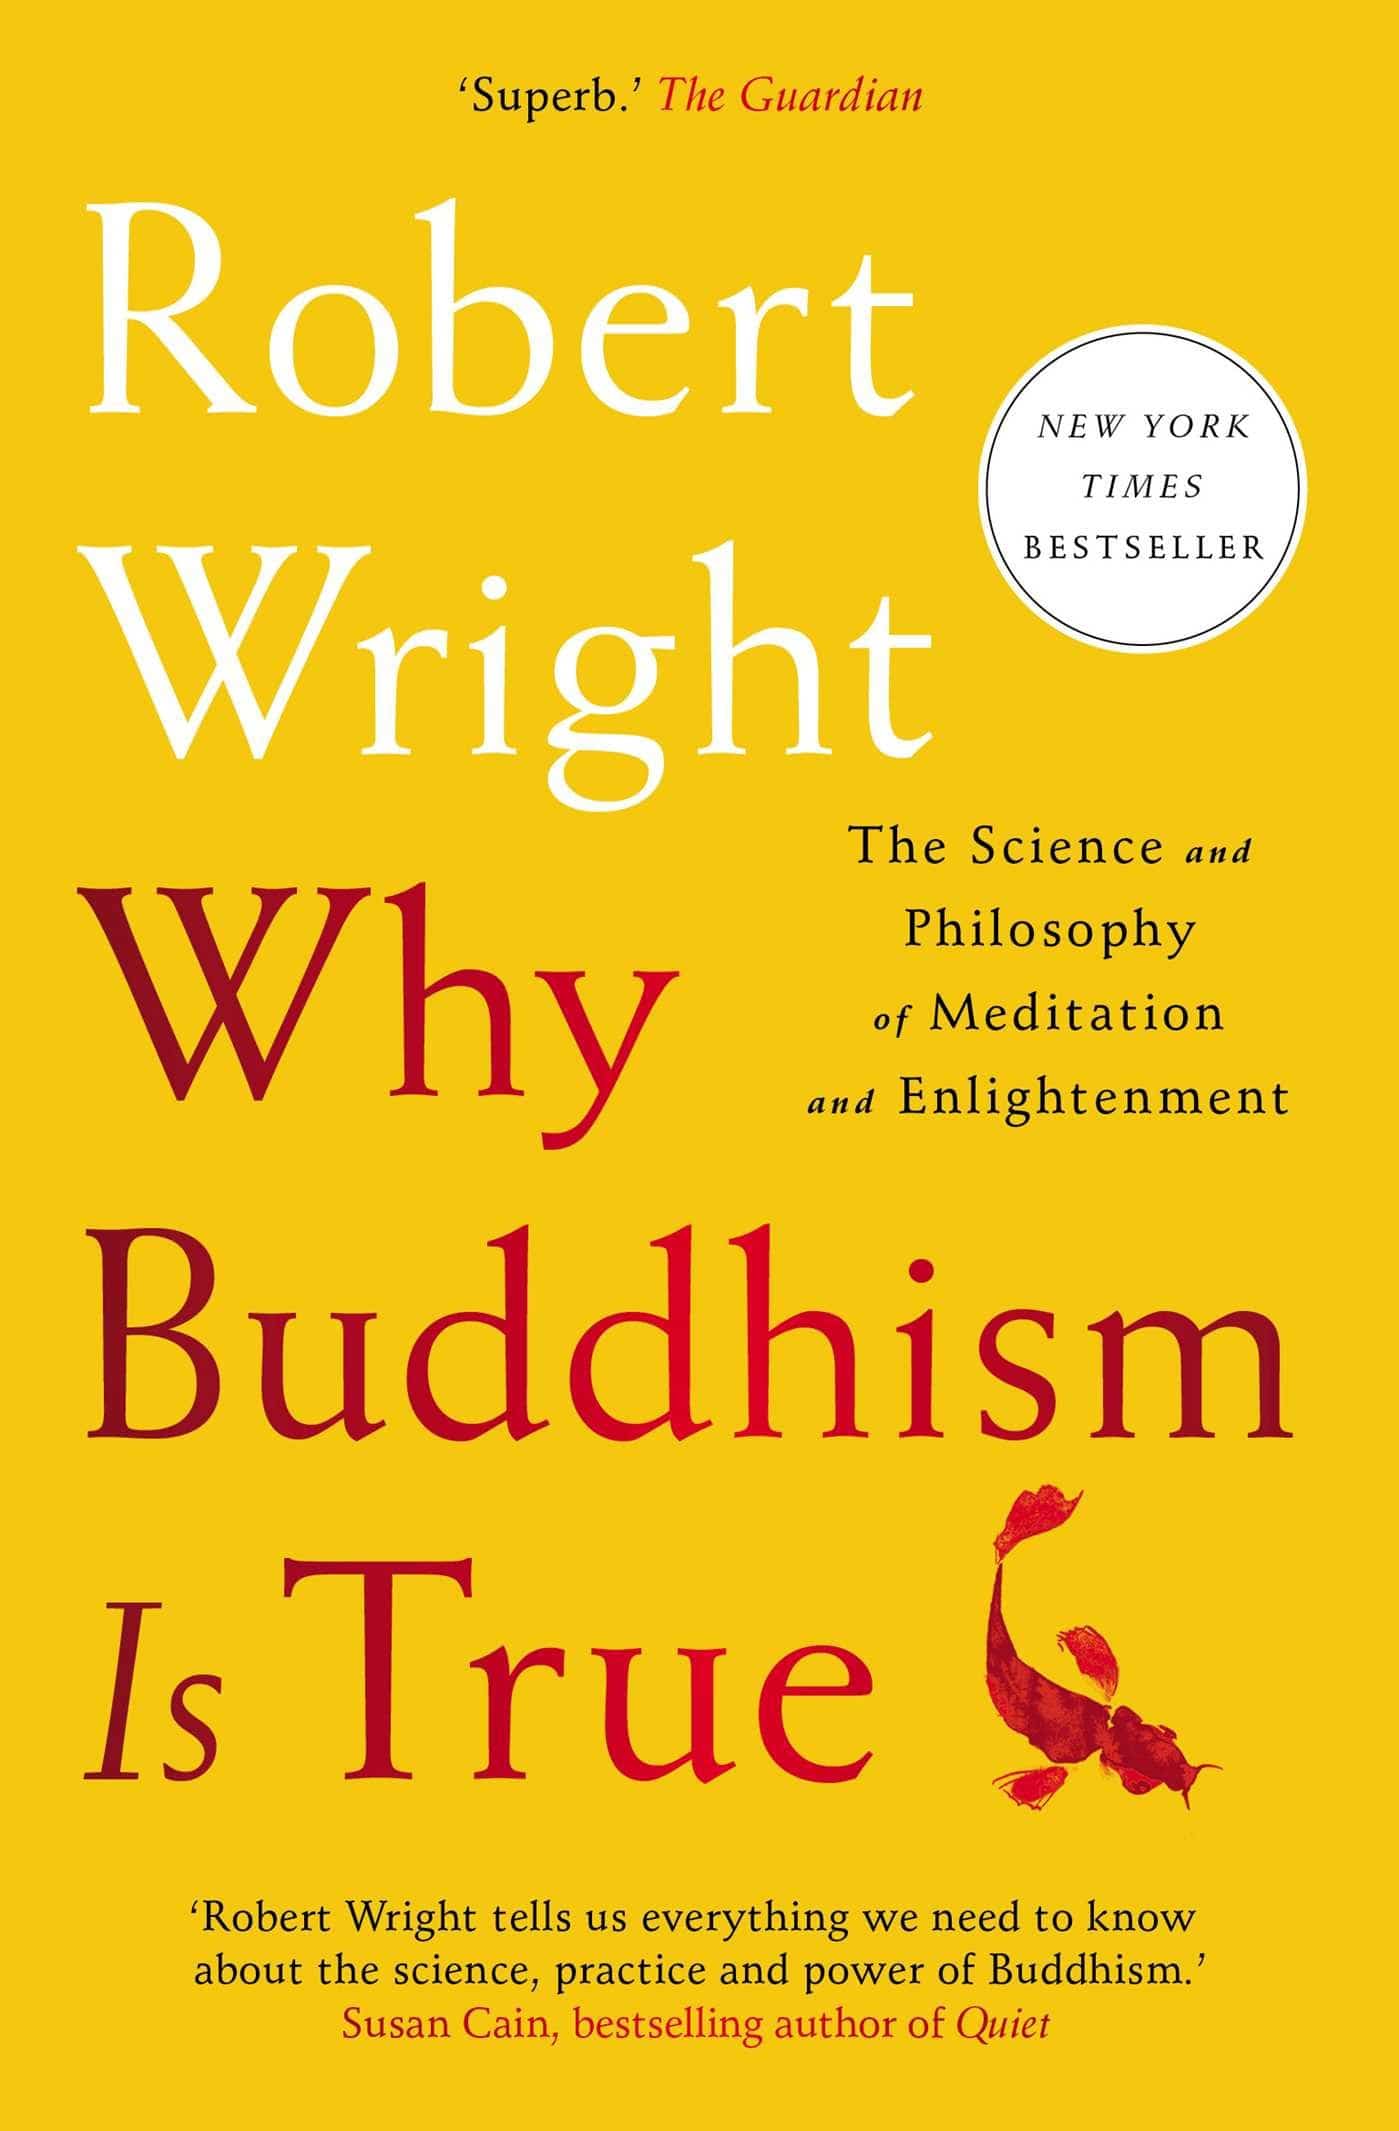 The cover of Why Buddhism is True